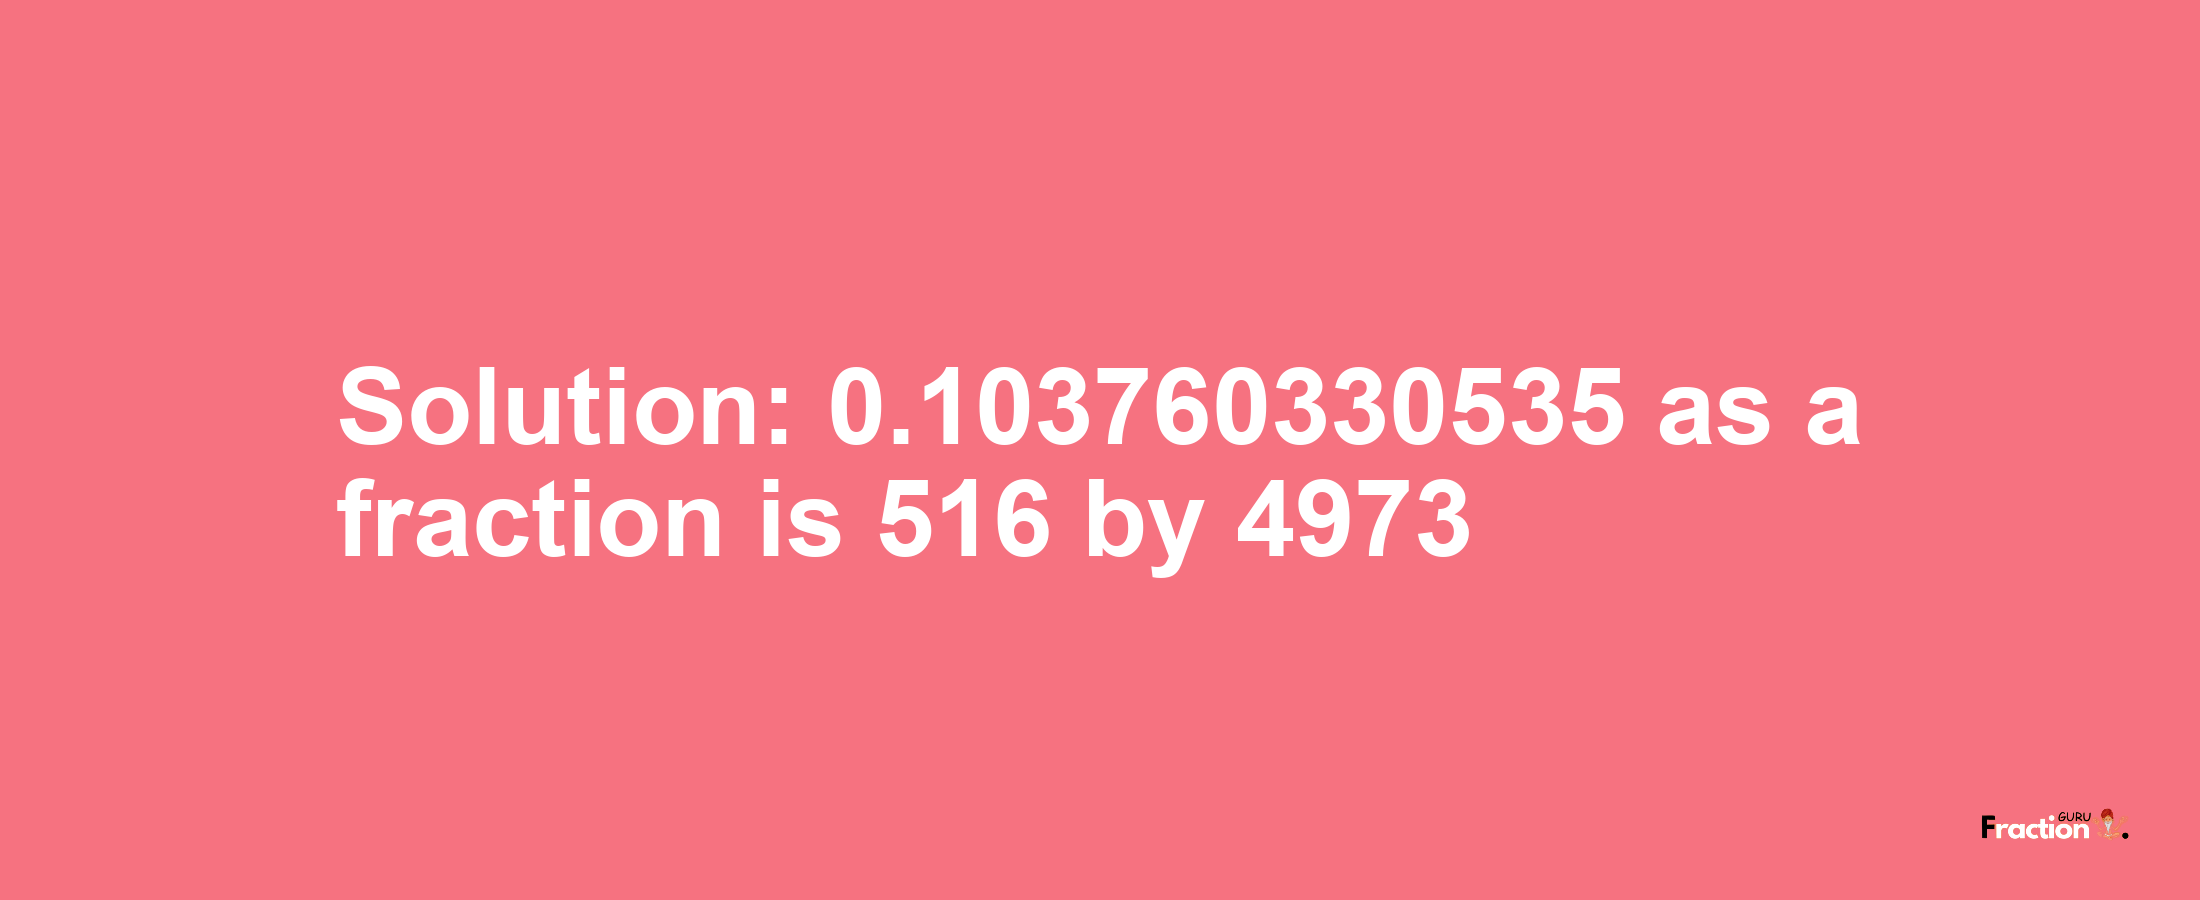 Solution:0.103760330535 as a fraction is 516/4973